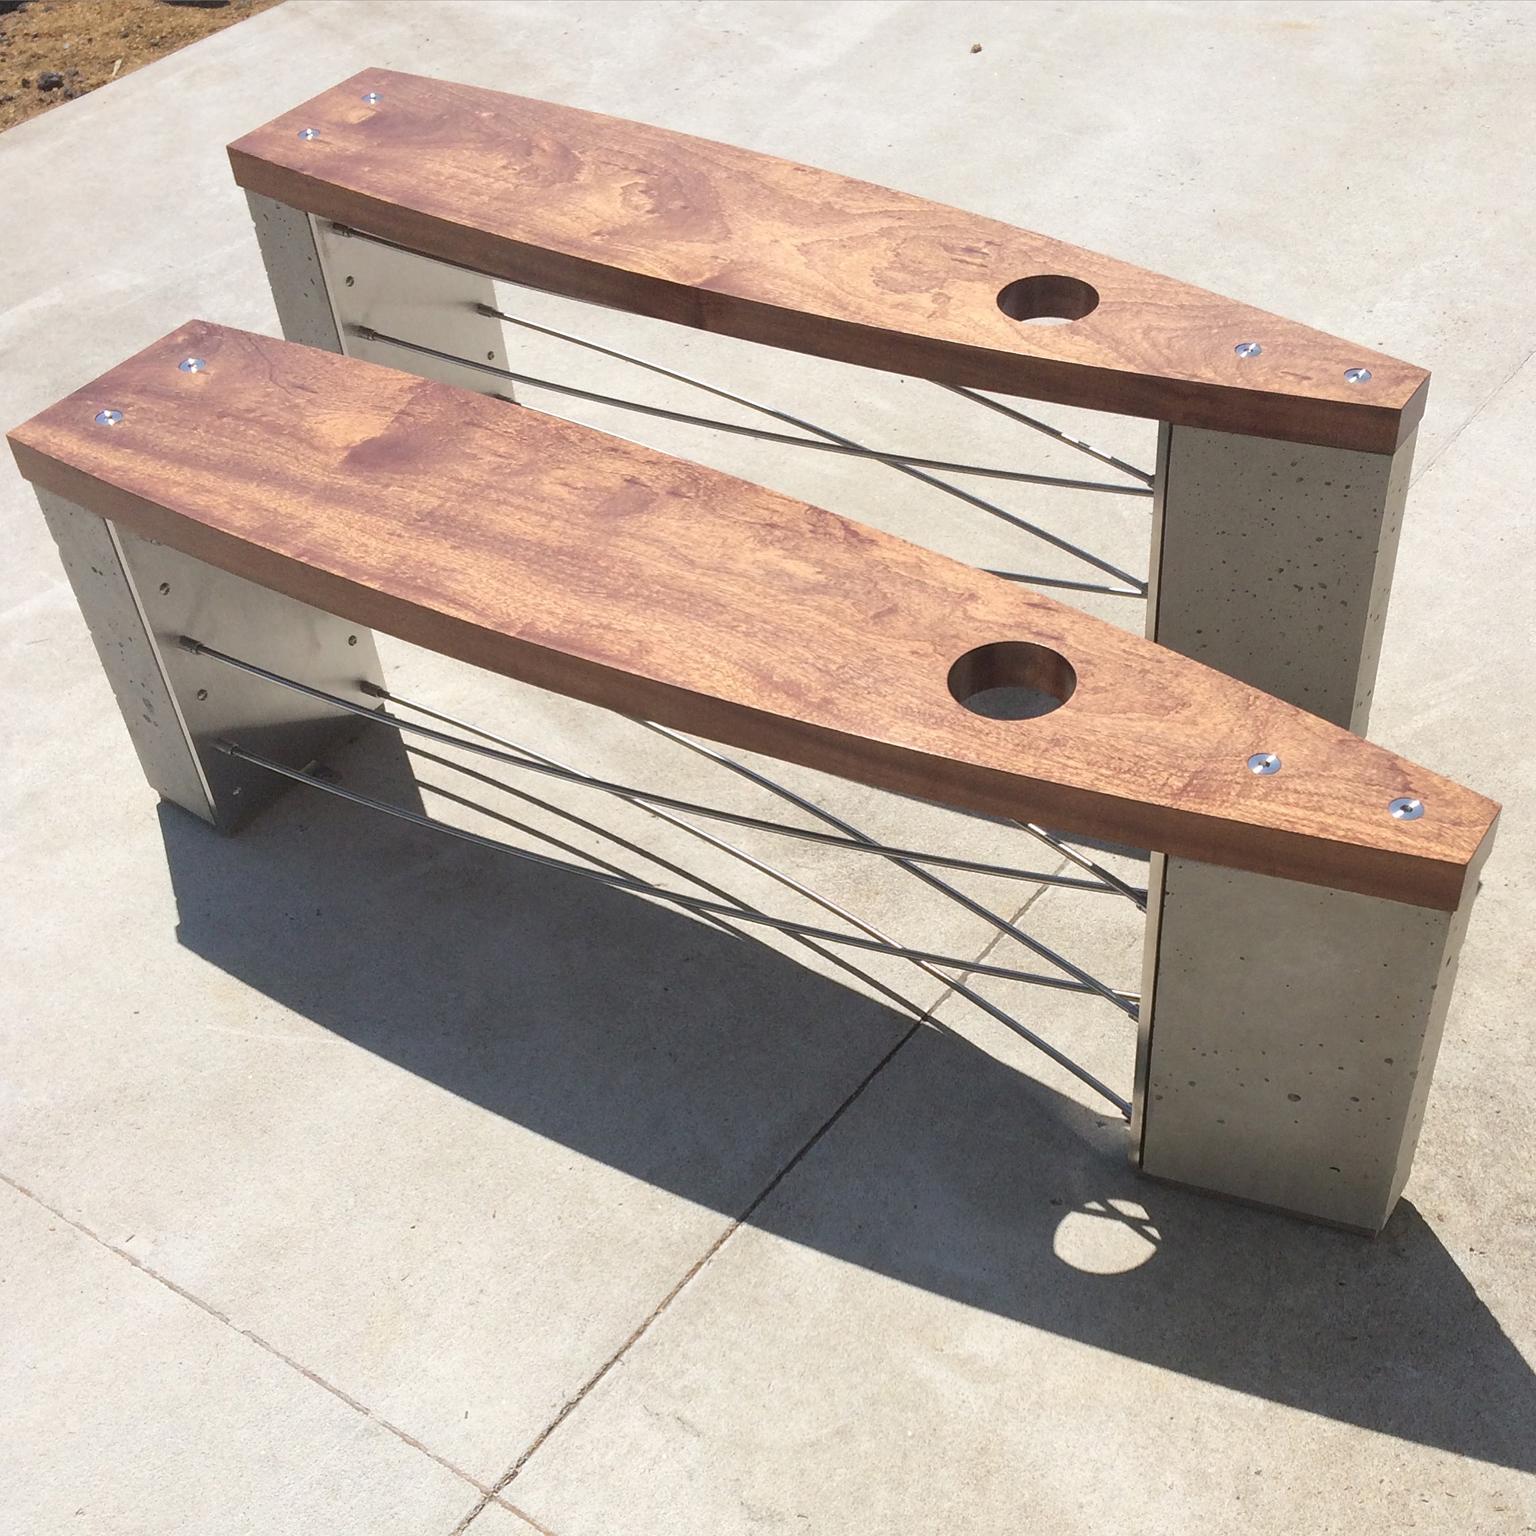 This is an outdoor version of the Classic Jupiter bench by Peter Harrison. It is constructed of concrete, stainless steel, and mahogany and specifically intended for exterior use. Its design has nautical references. The hole through the top centers